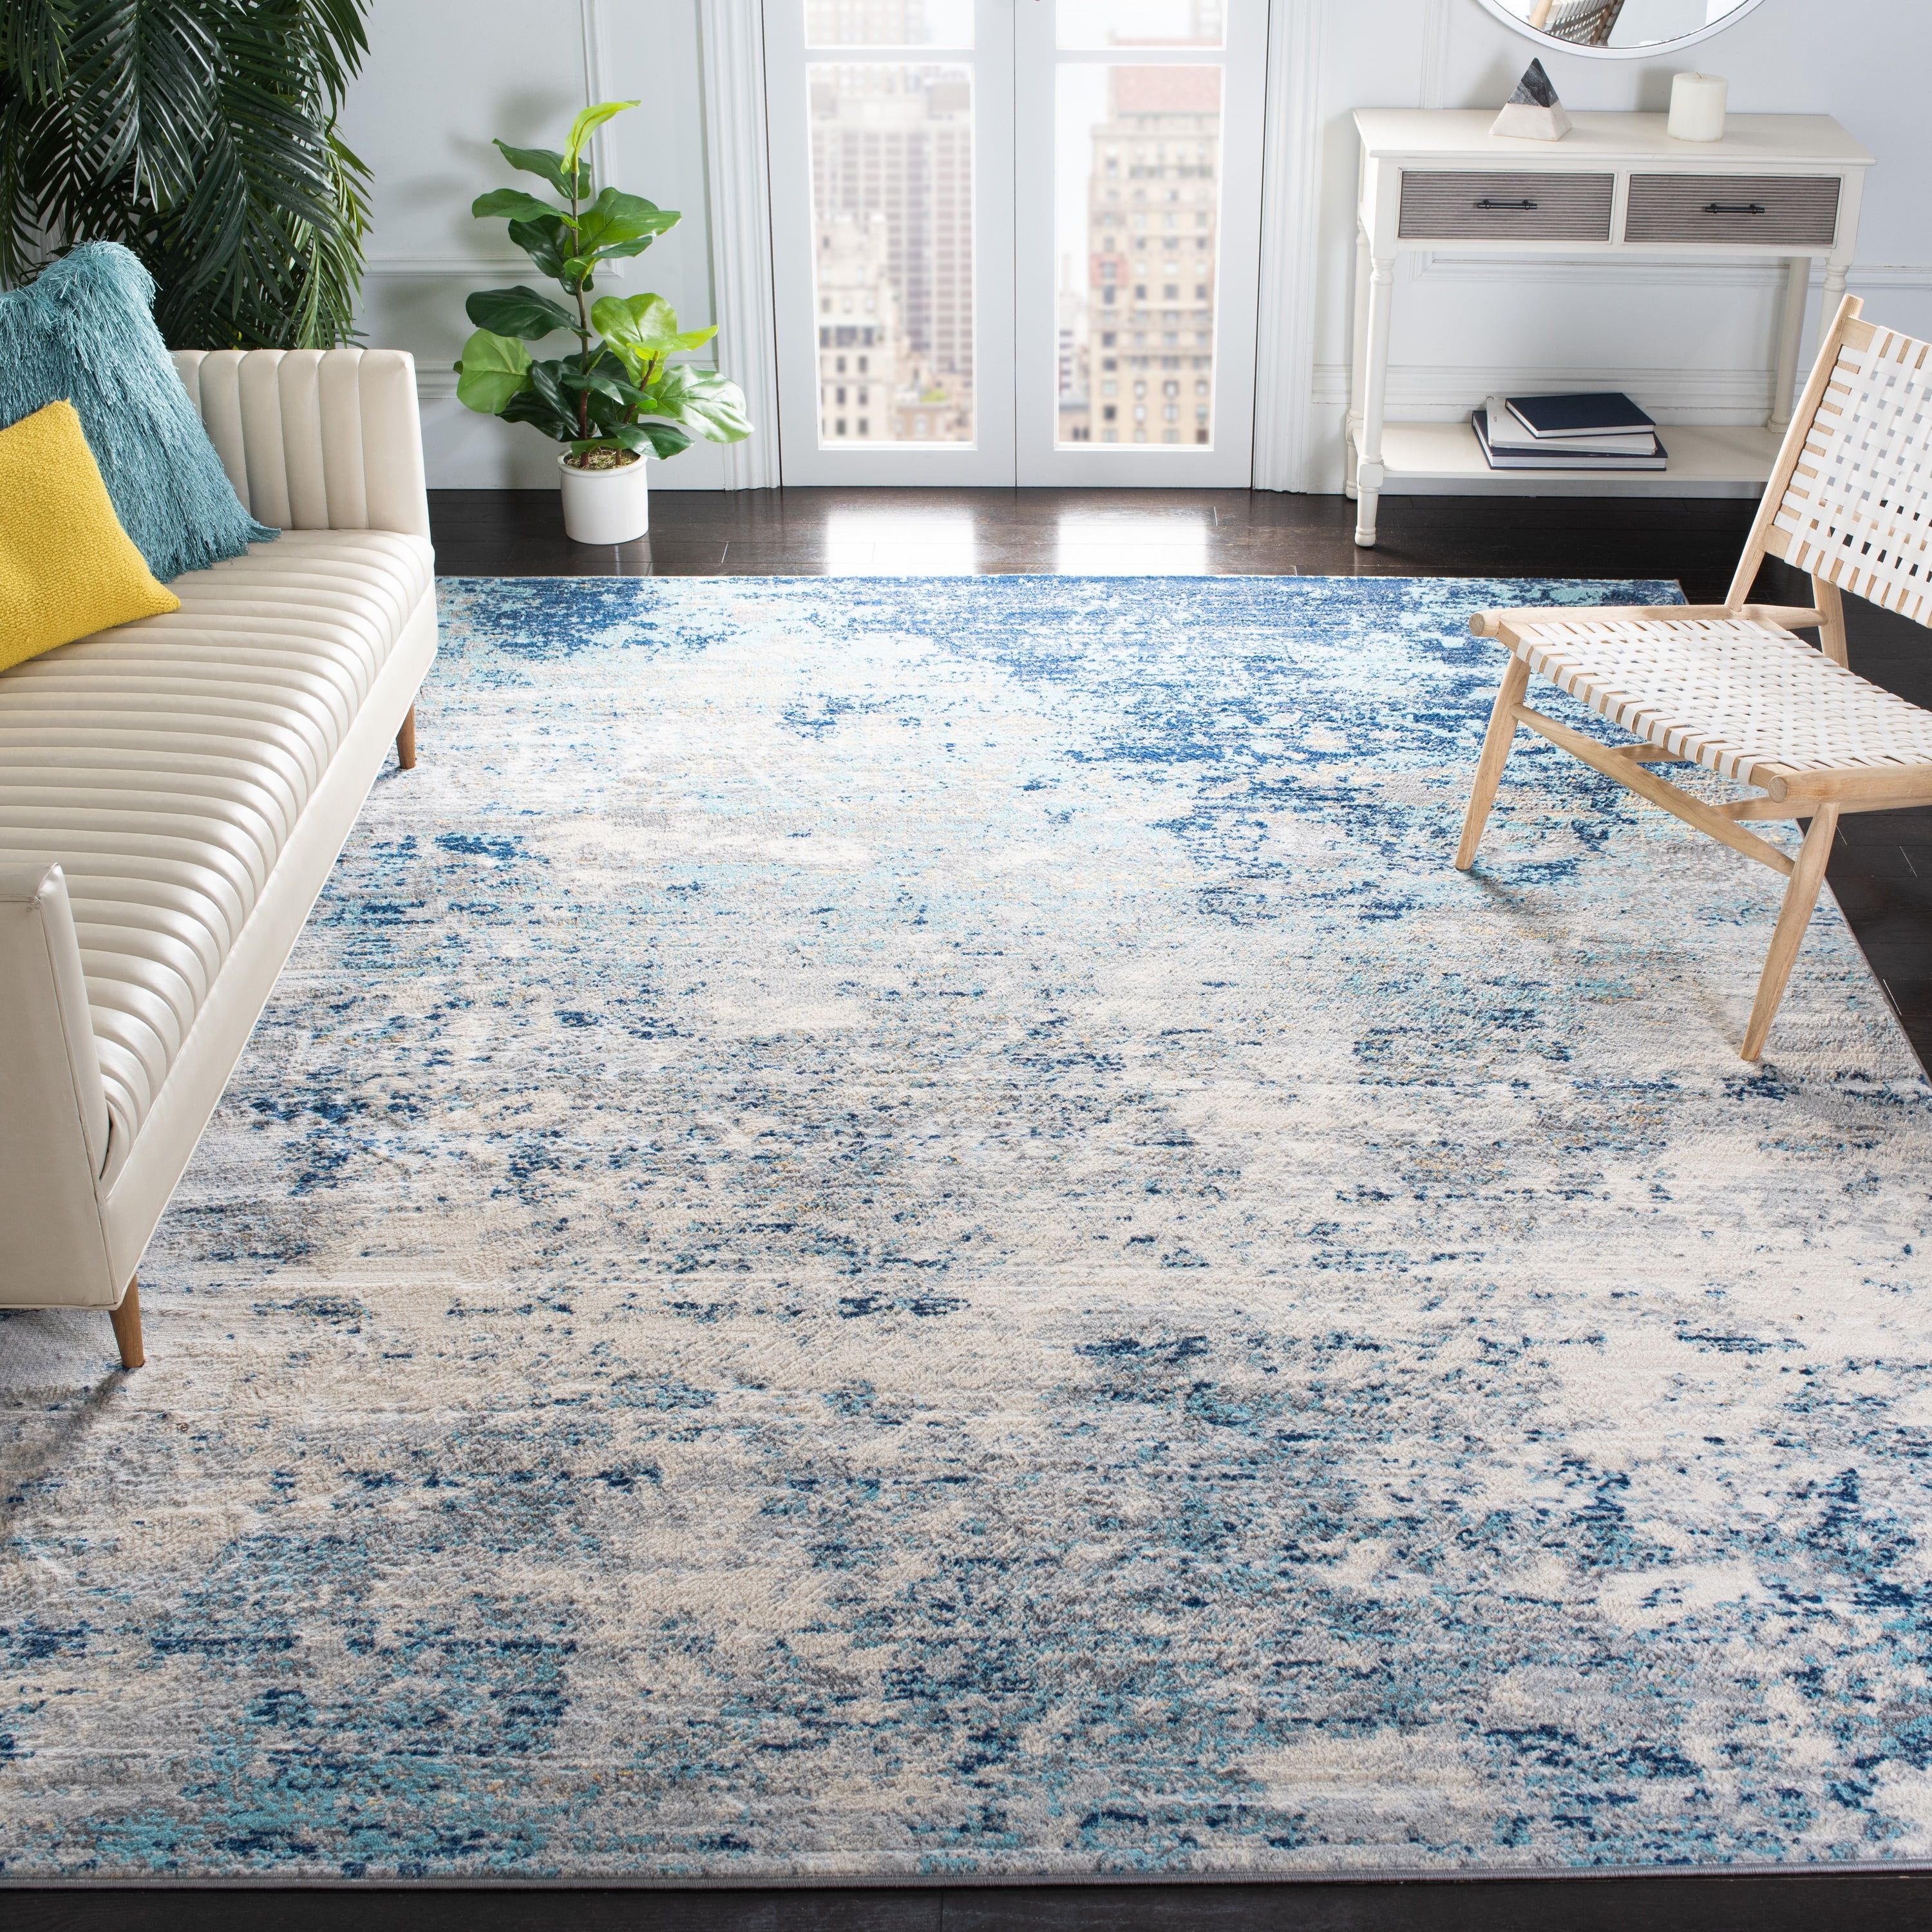 FAST SHIPPING BEDROOM LIVING ROOM ABSTRACT LUXE CARPETS RUGS BLUE GRAY AREA RUG 